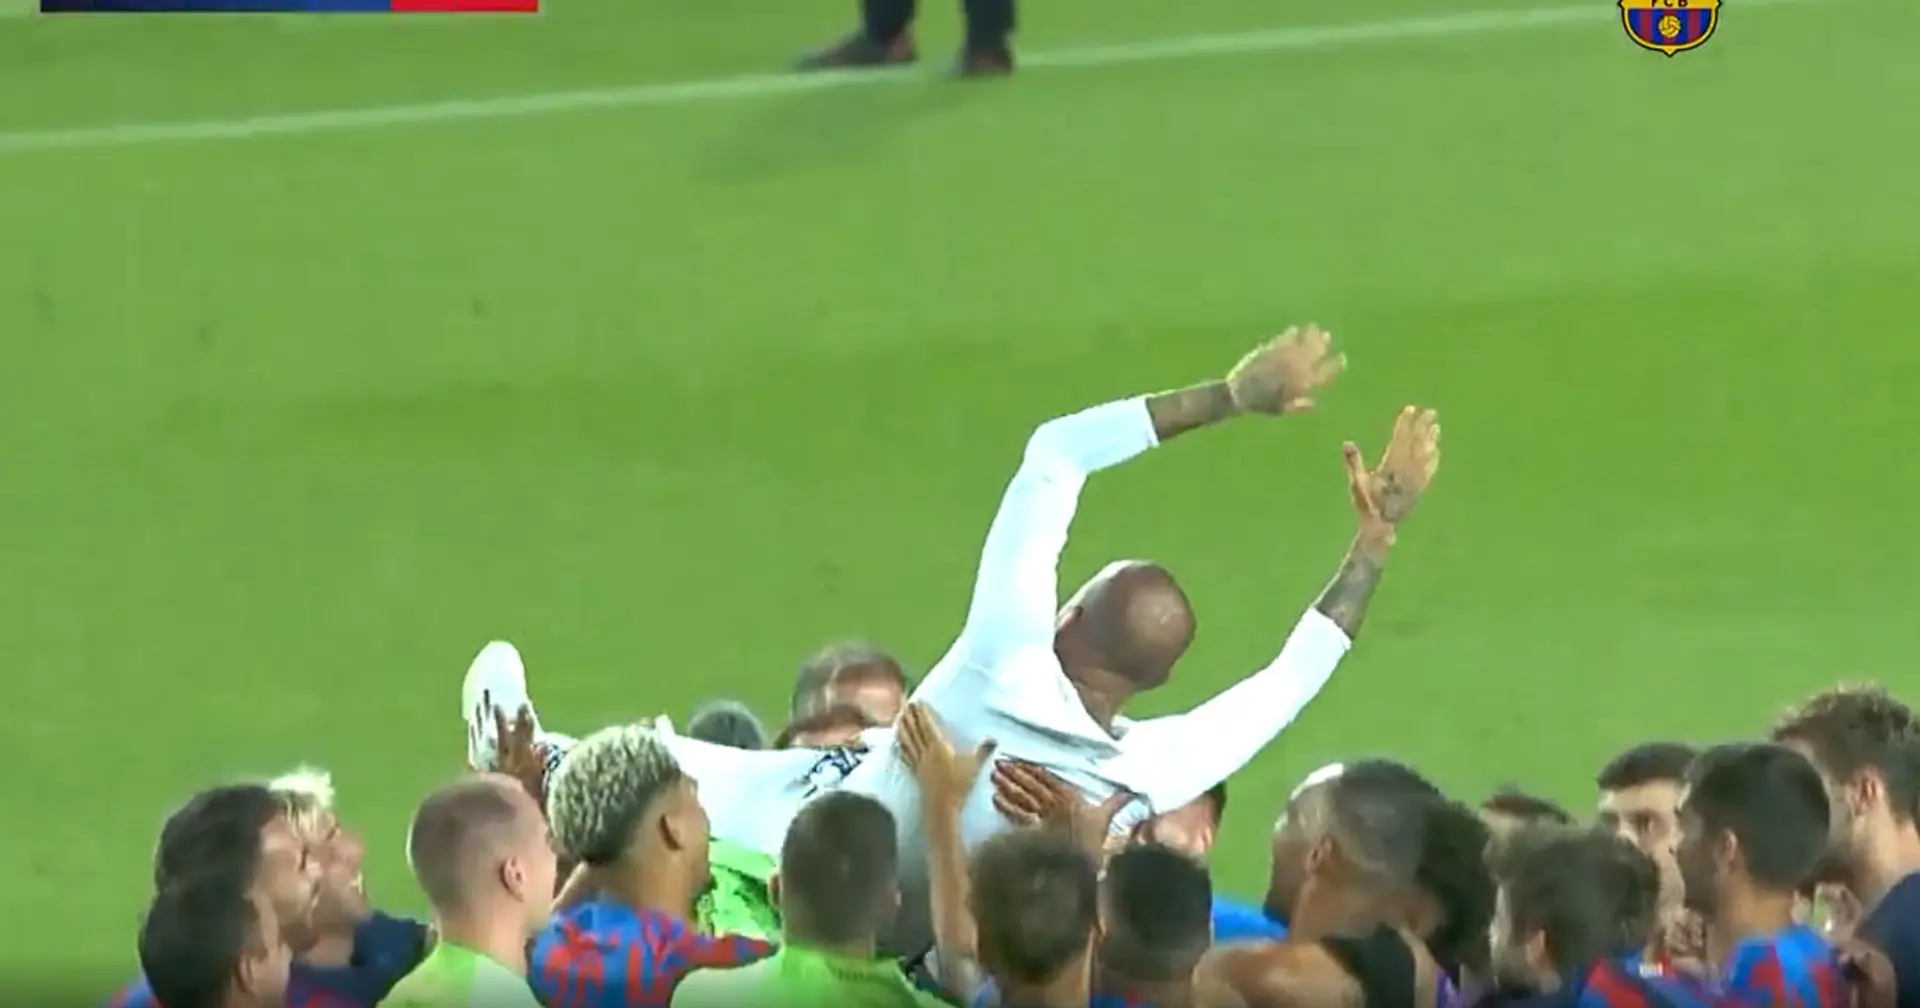 a6a4b1d0 1c60 42c0 ac74 758c9c4b6dbc?width=1920&quality=75 Barca players celebrate Dani Alves greatness with touching act